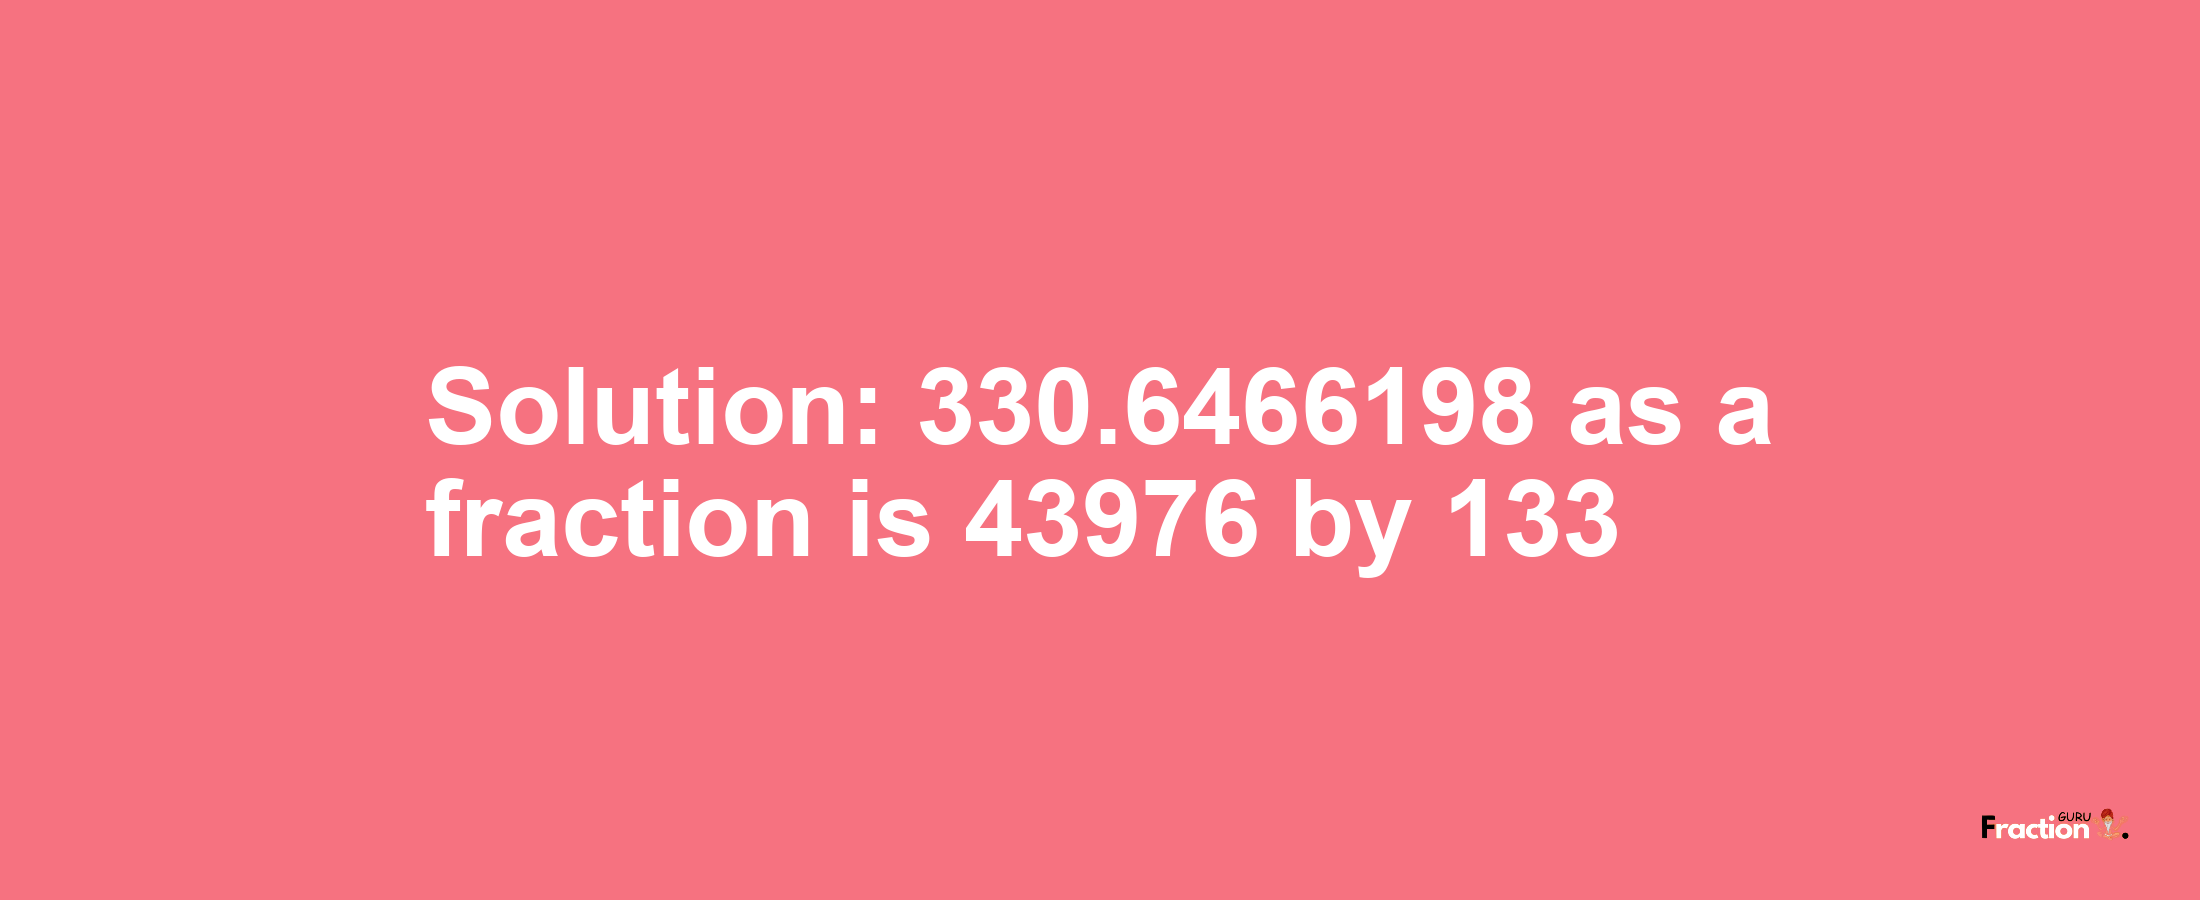 Solution:330.6466198 as a fraction is 43976/133